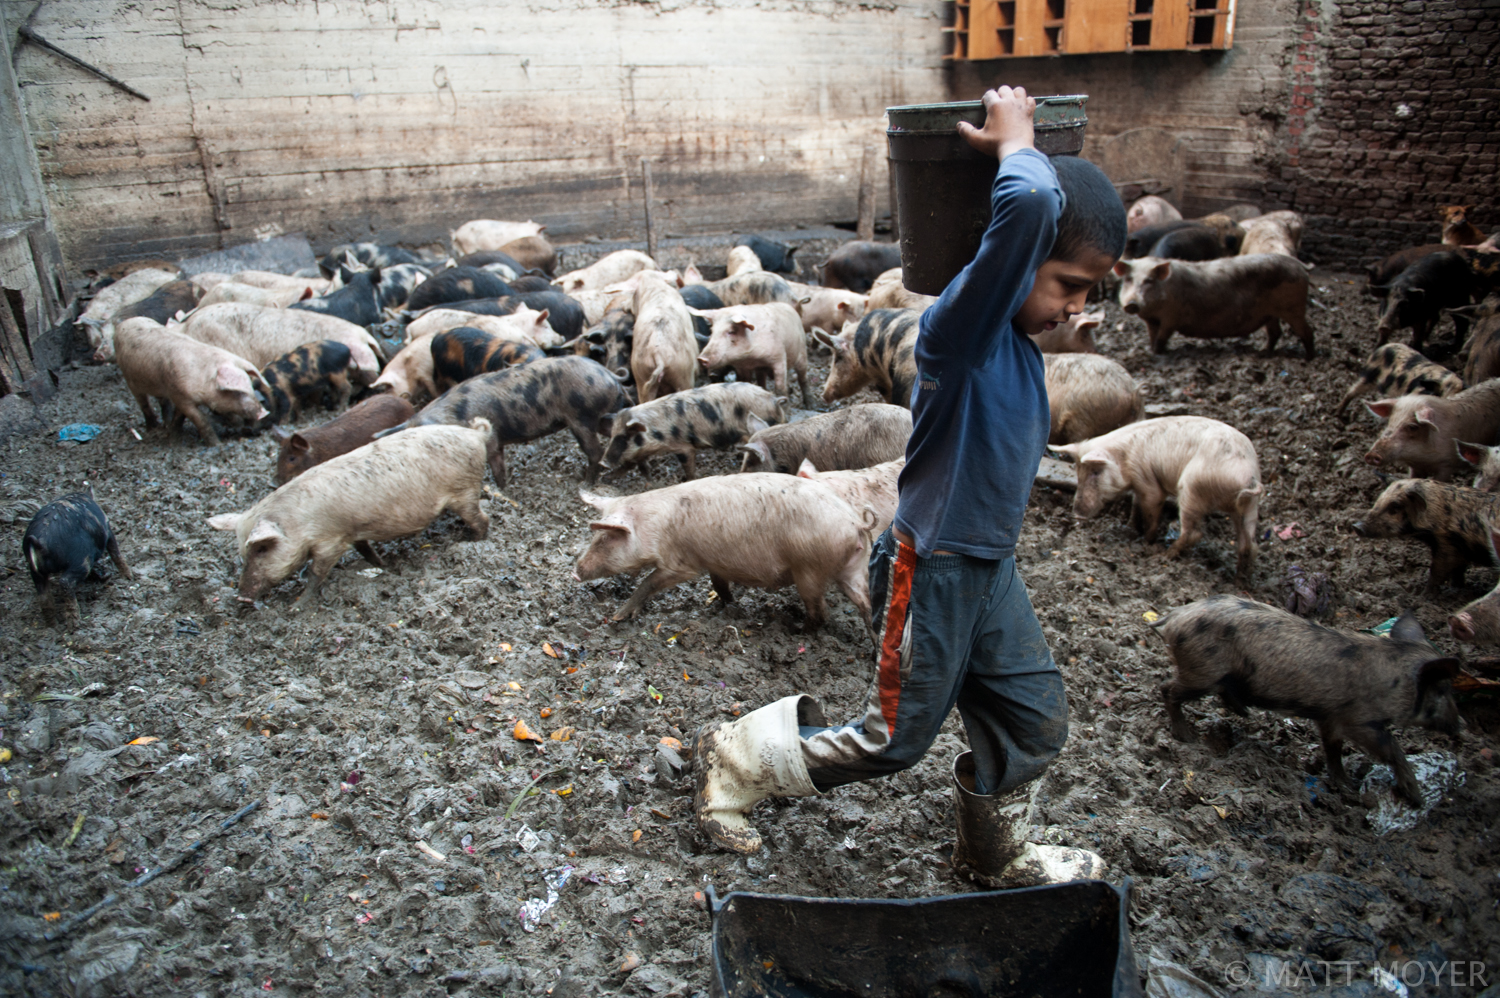  A young Muslim boy, who works for Christians, feeds pigs in a Christian area of Cairo, Egypt. May Coptic Christians survive by collecting and sorting trash in Cairo. 